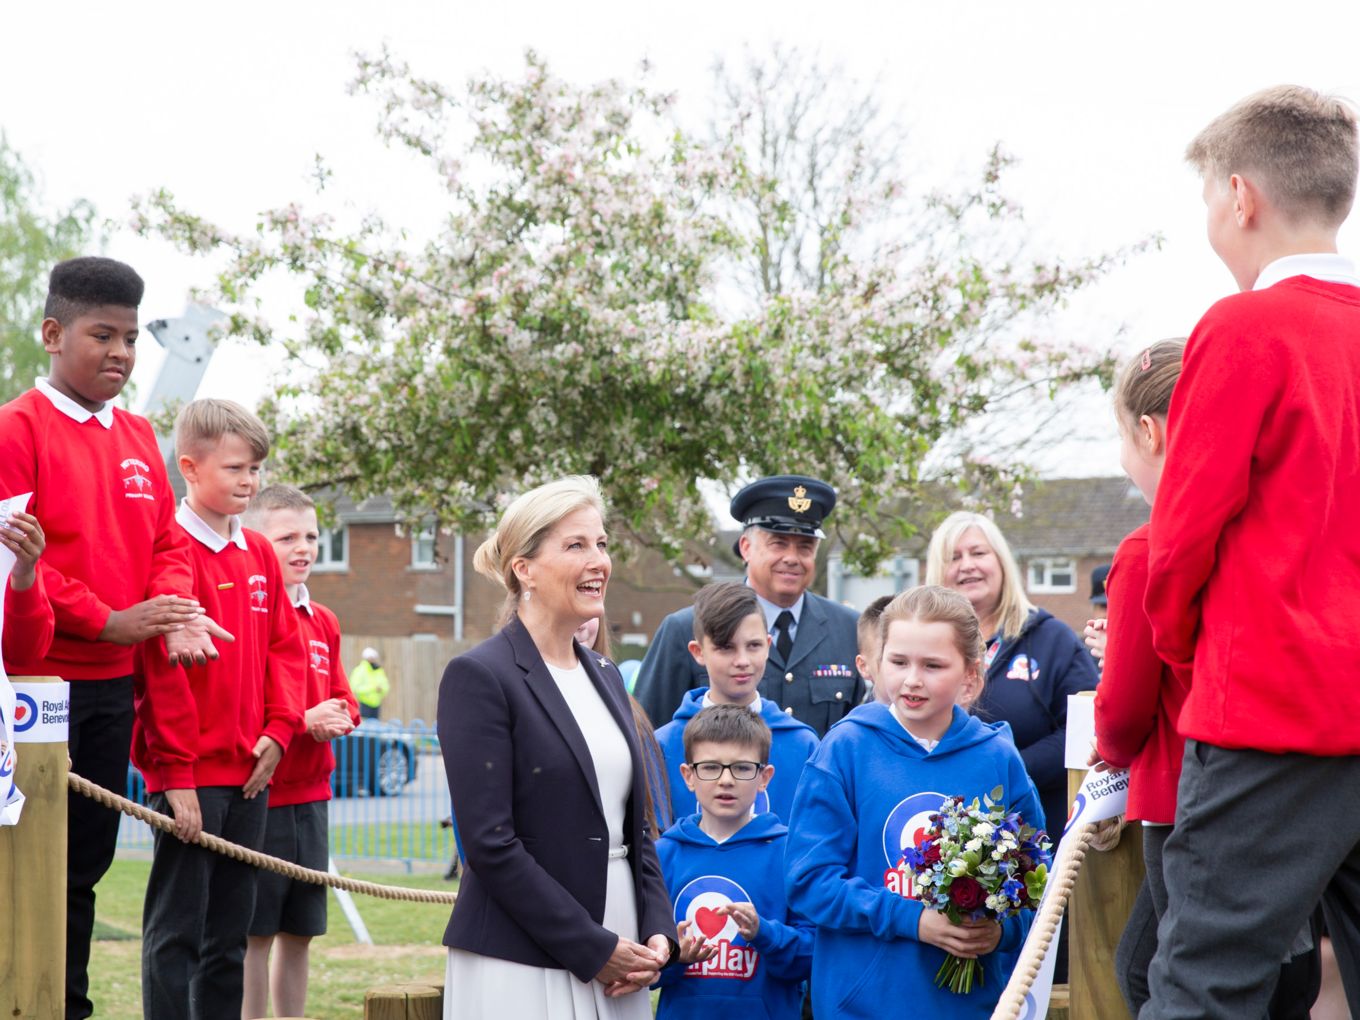 HRH meets some of the children, Hannah Avery is holding the posy.